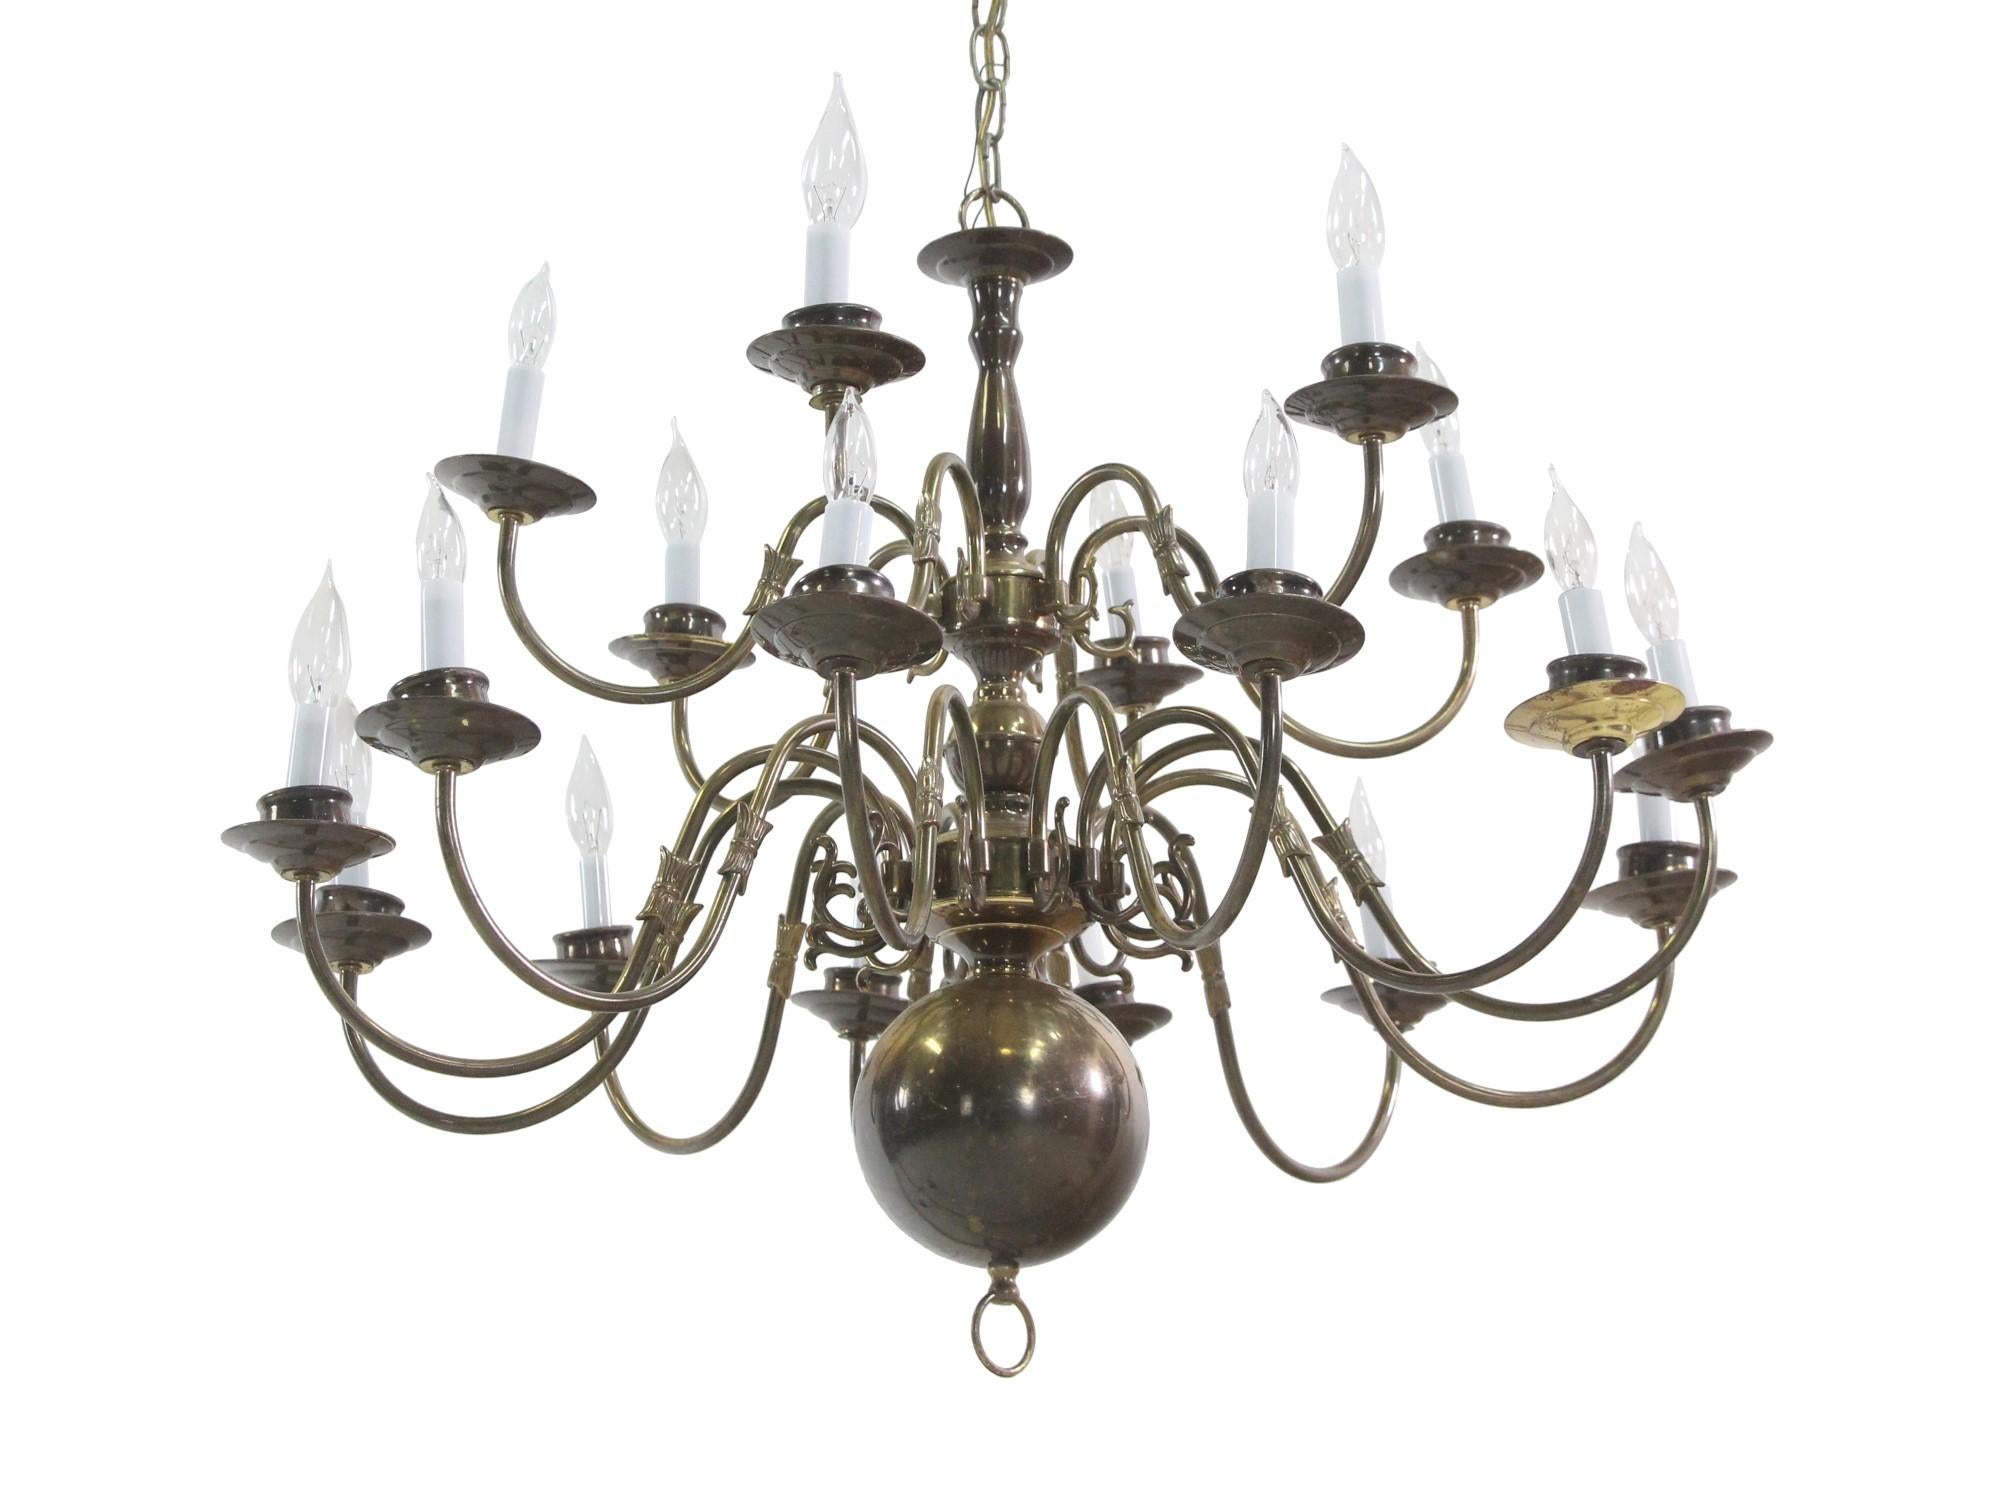 This two tiered Williamsburg style chandelier has 18 lights with scrolled arms and a natural patina. This light has been rewired. This can be seen at our 400 Gilligan St location in Scranton, PA.

